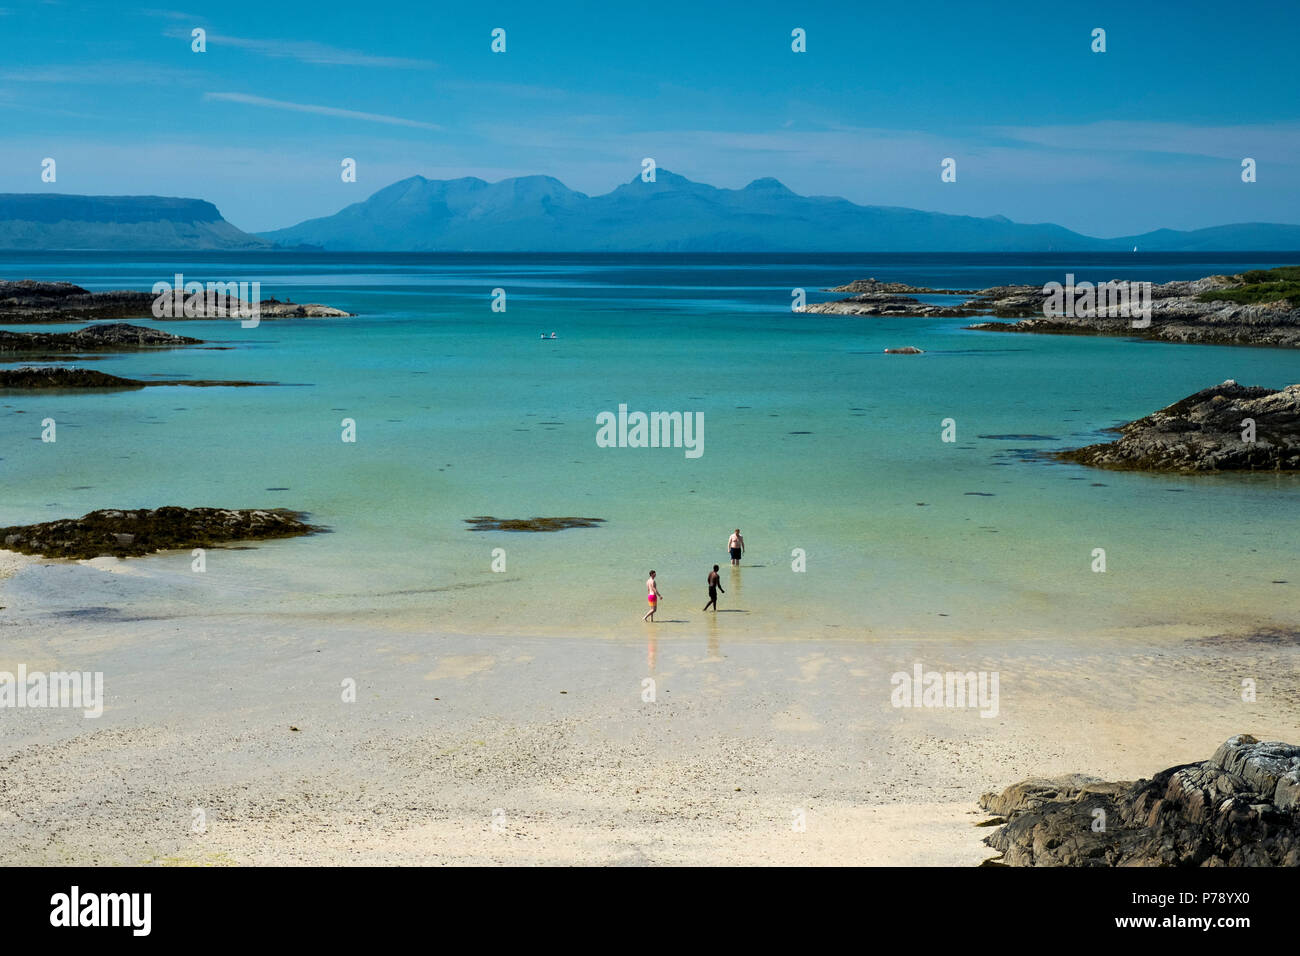 Swimmers in the sea in a sandy bay at Traigh near Arisaig with the islands of Eigg and Rum in the distance. Stock Photo